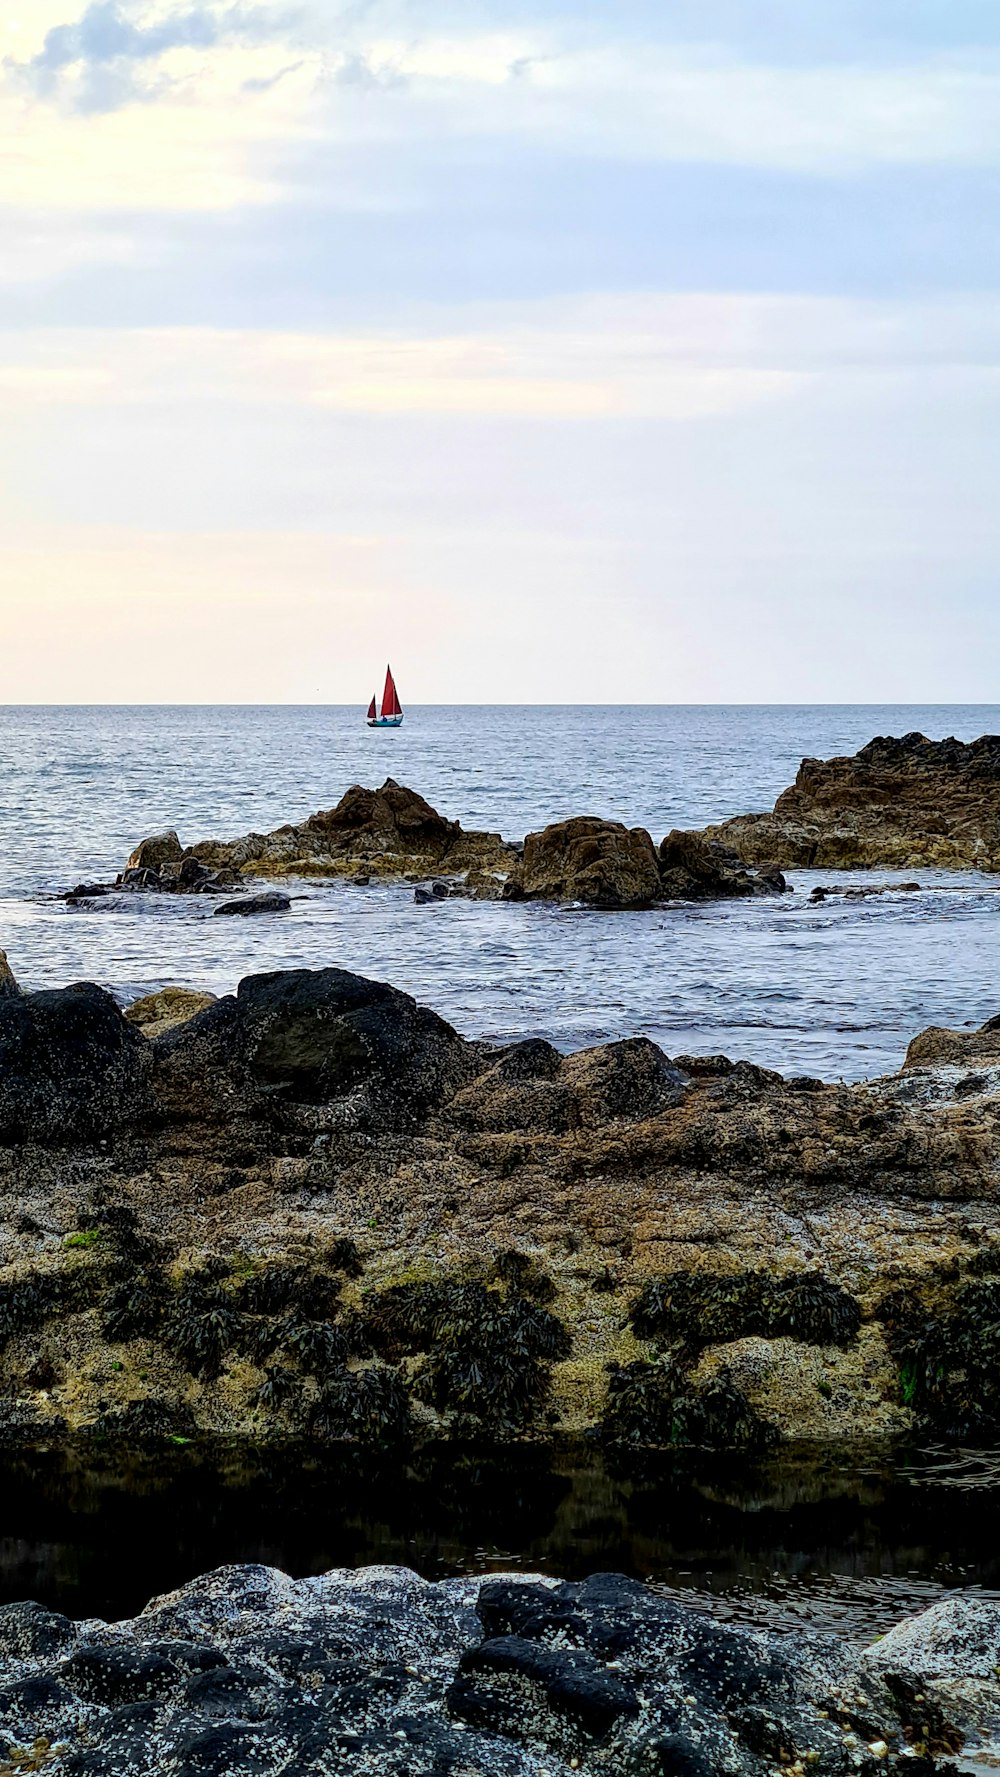 brown rocky shore with red and white flag on top during daytime